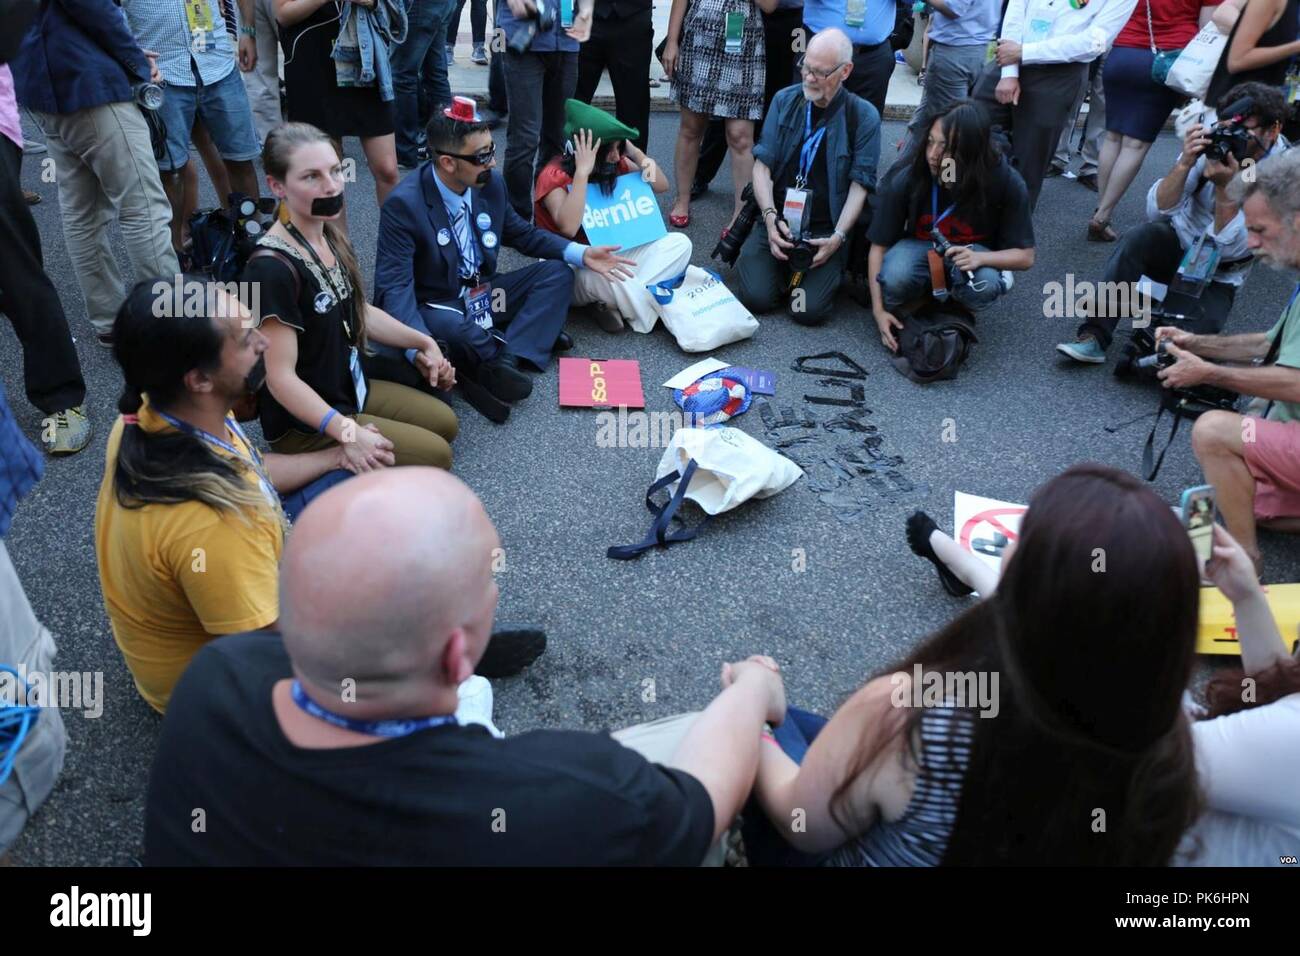 Bernie supporters continue their sit-in 6F62DF24. Stock Photo